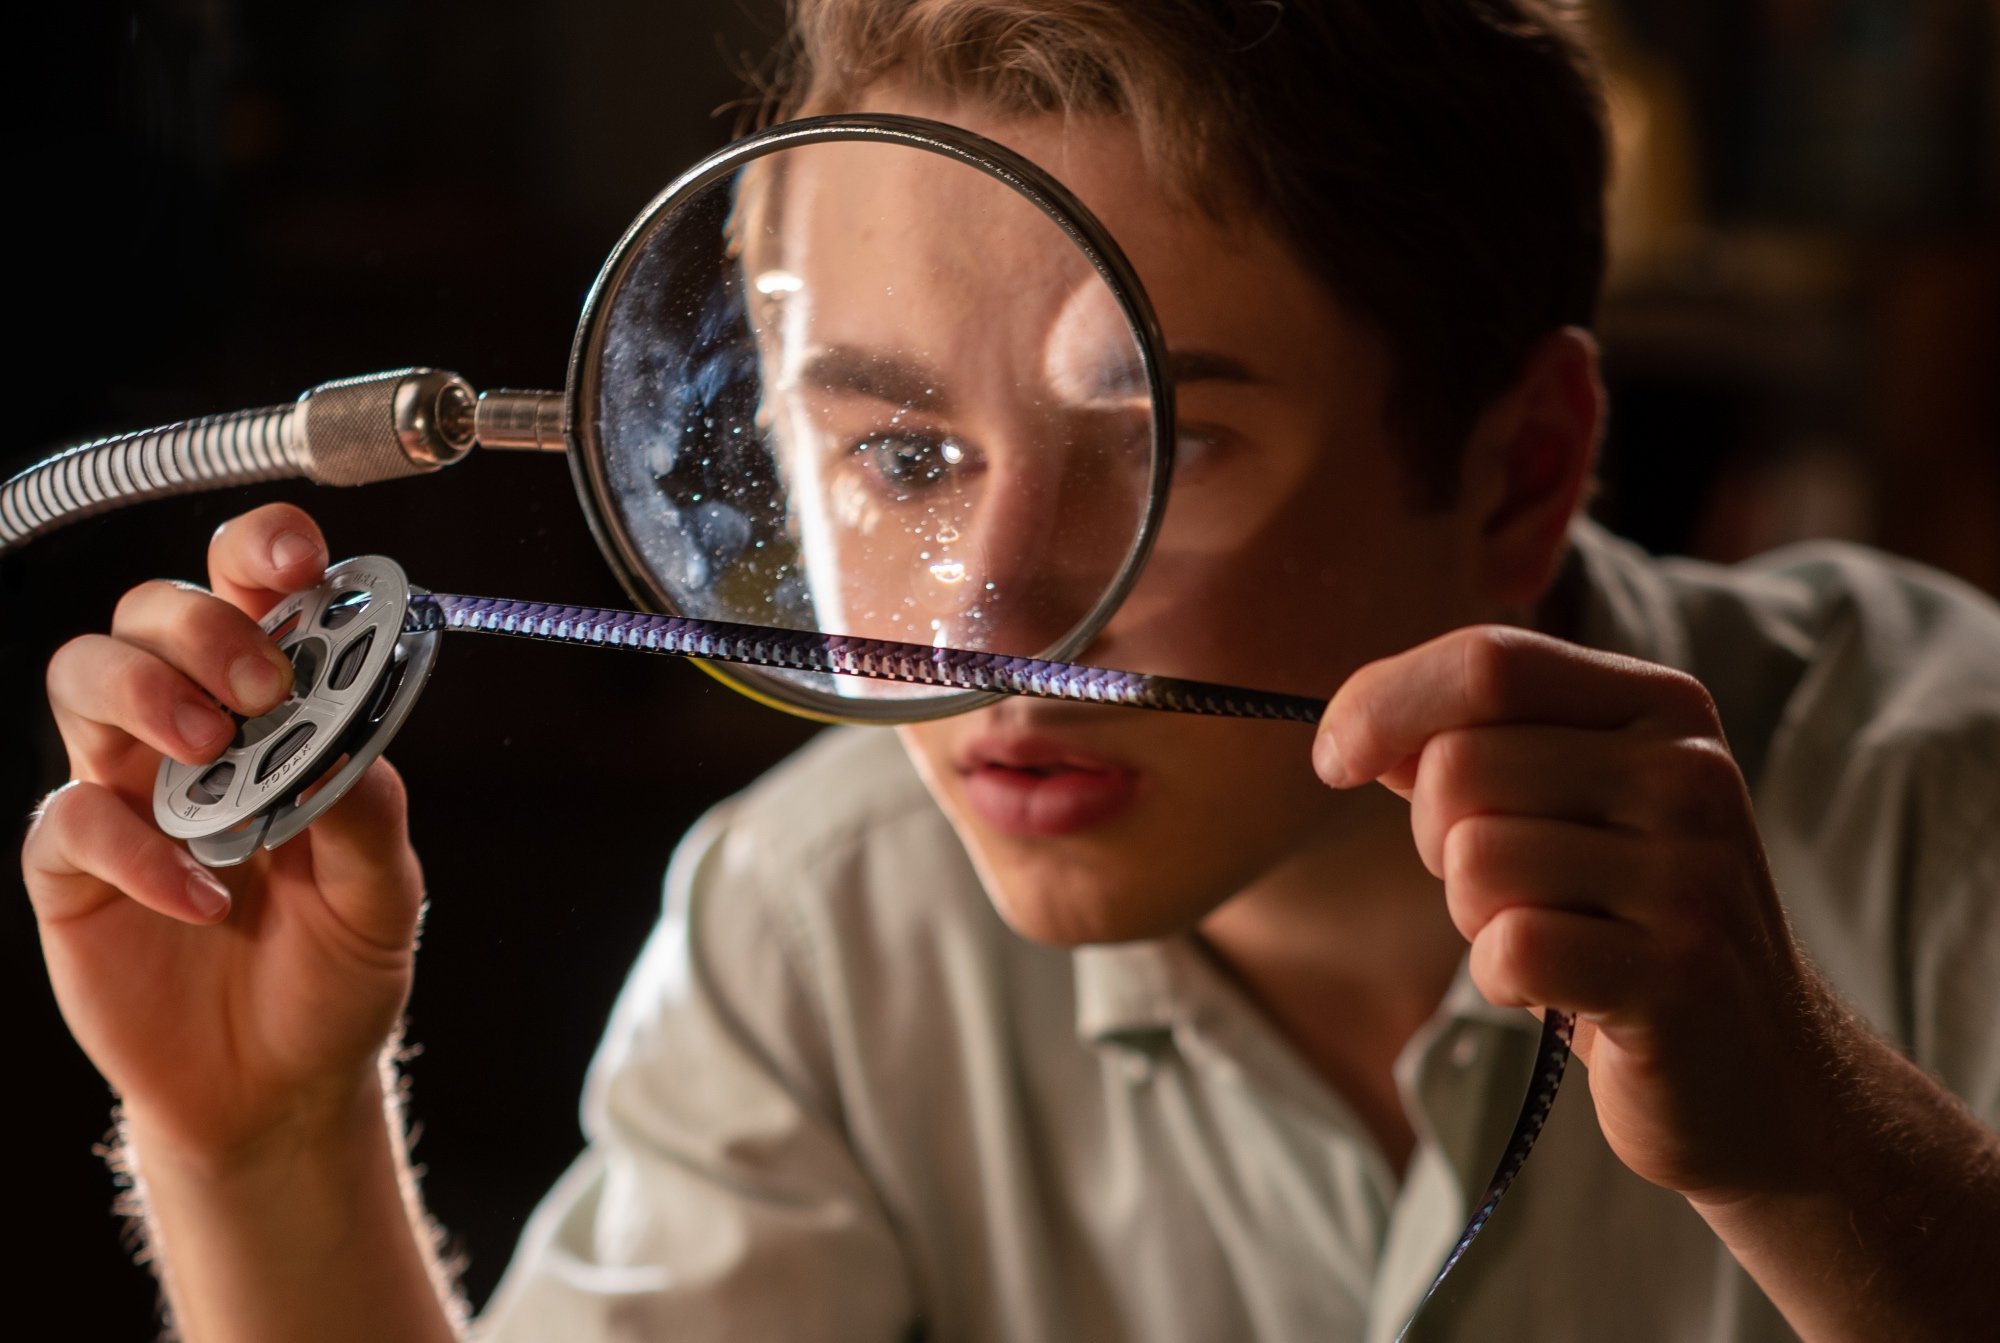 'The Fabelmans' Gabriel LaBelle as Sammy Fabelman looking at a reel of film through a magnifying glass